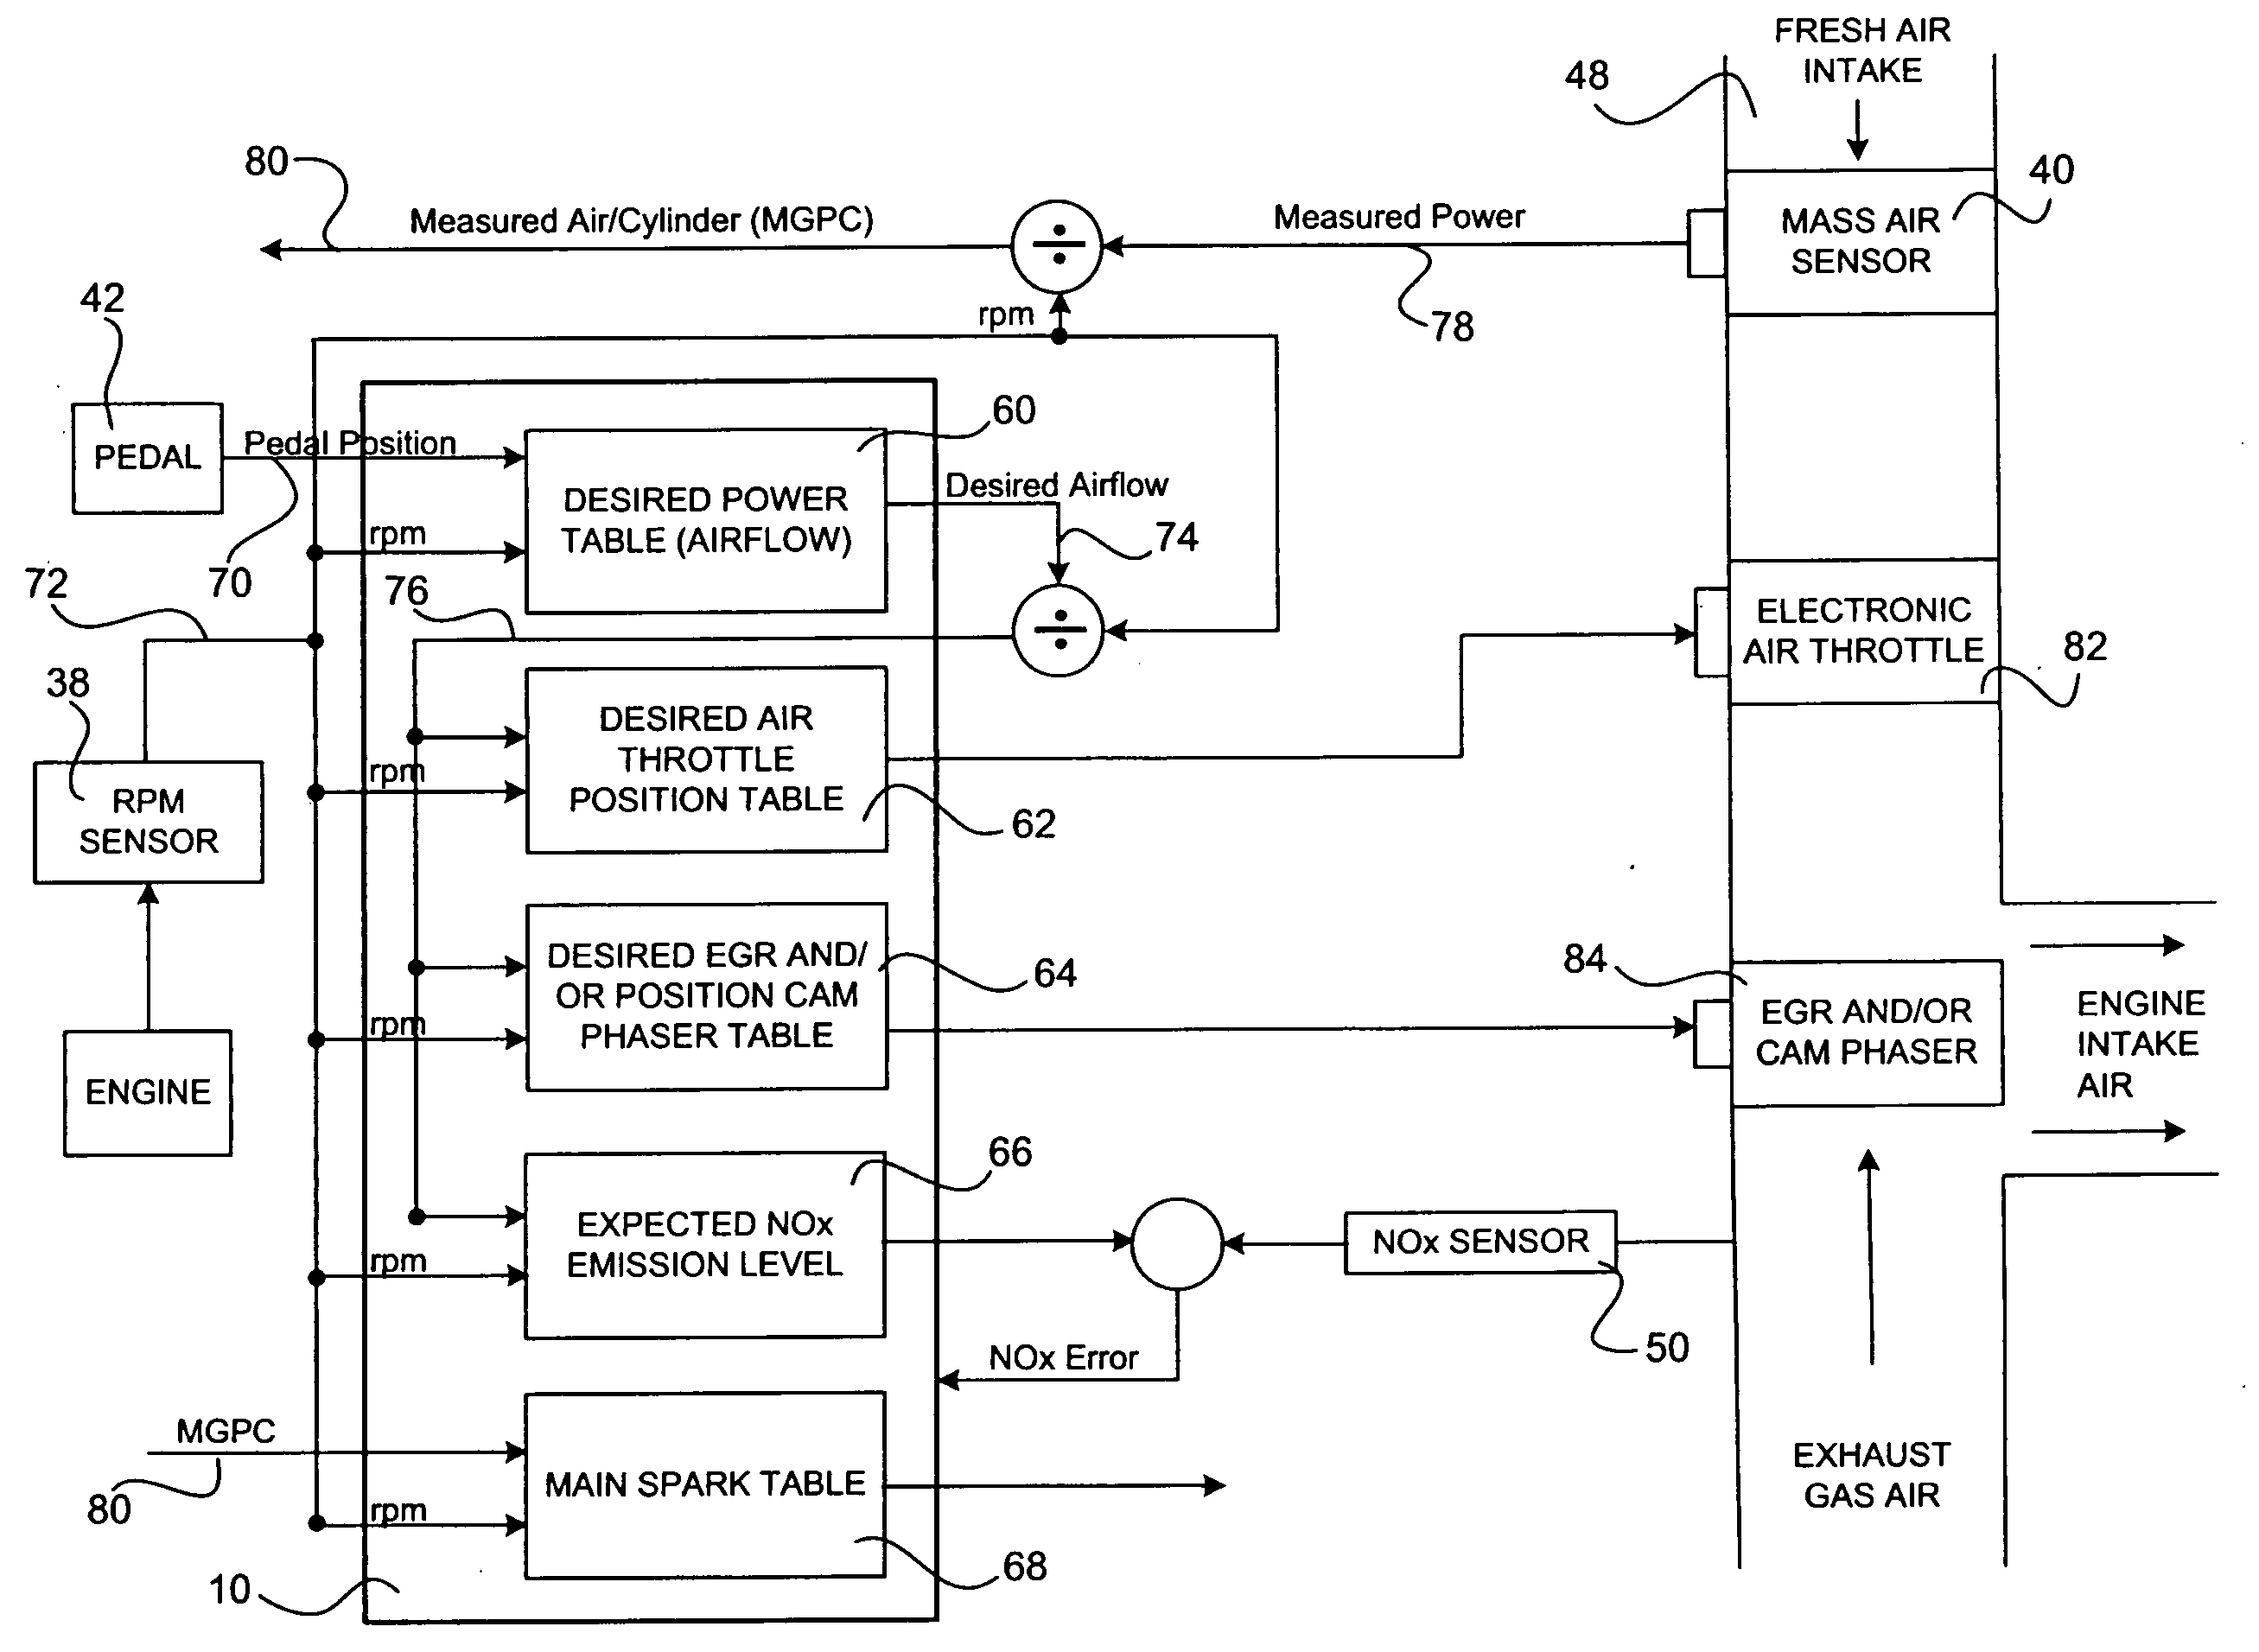 Control system for NOx control for cam phaser and/or EGR systems